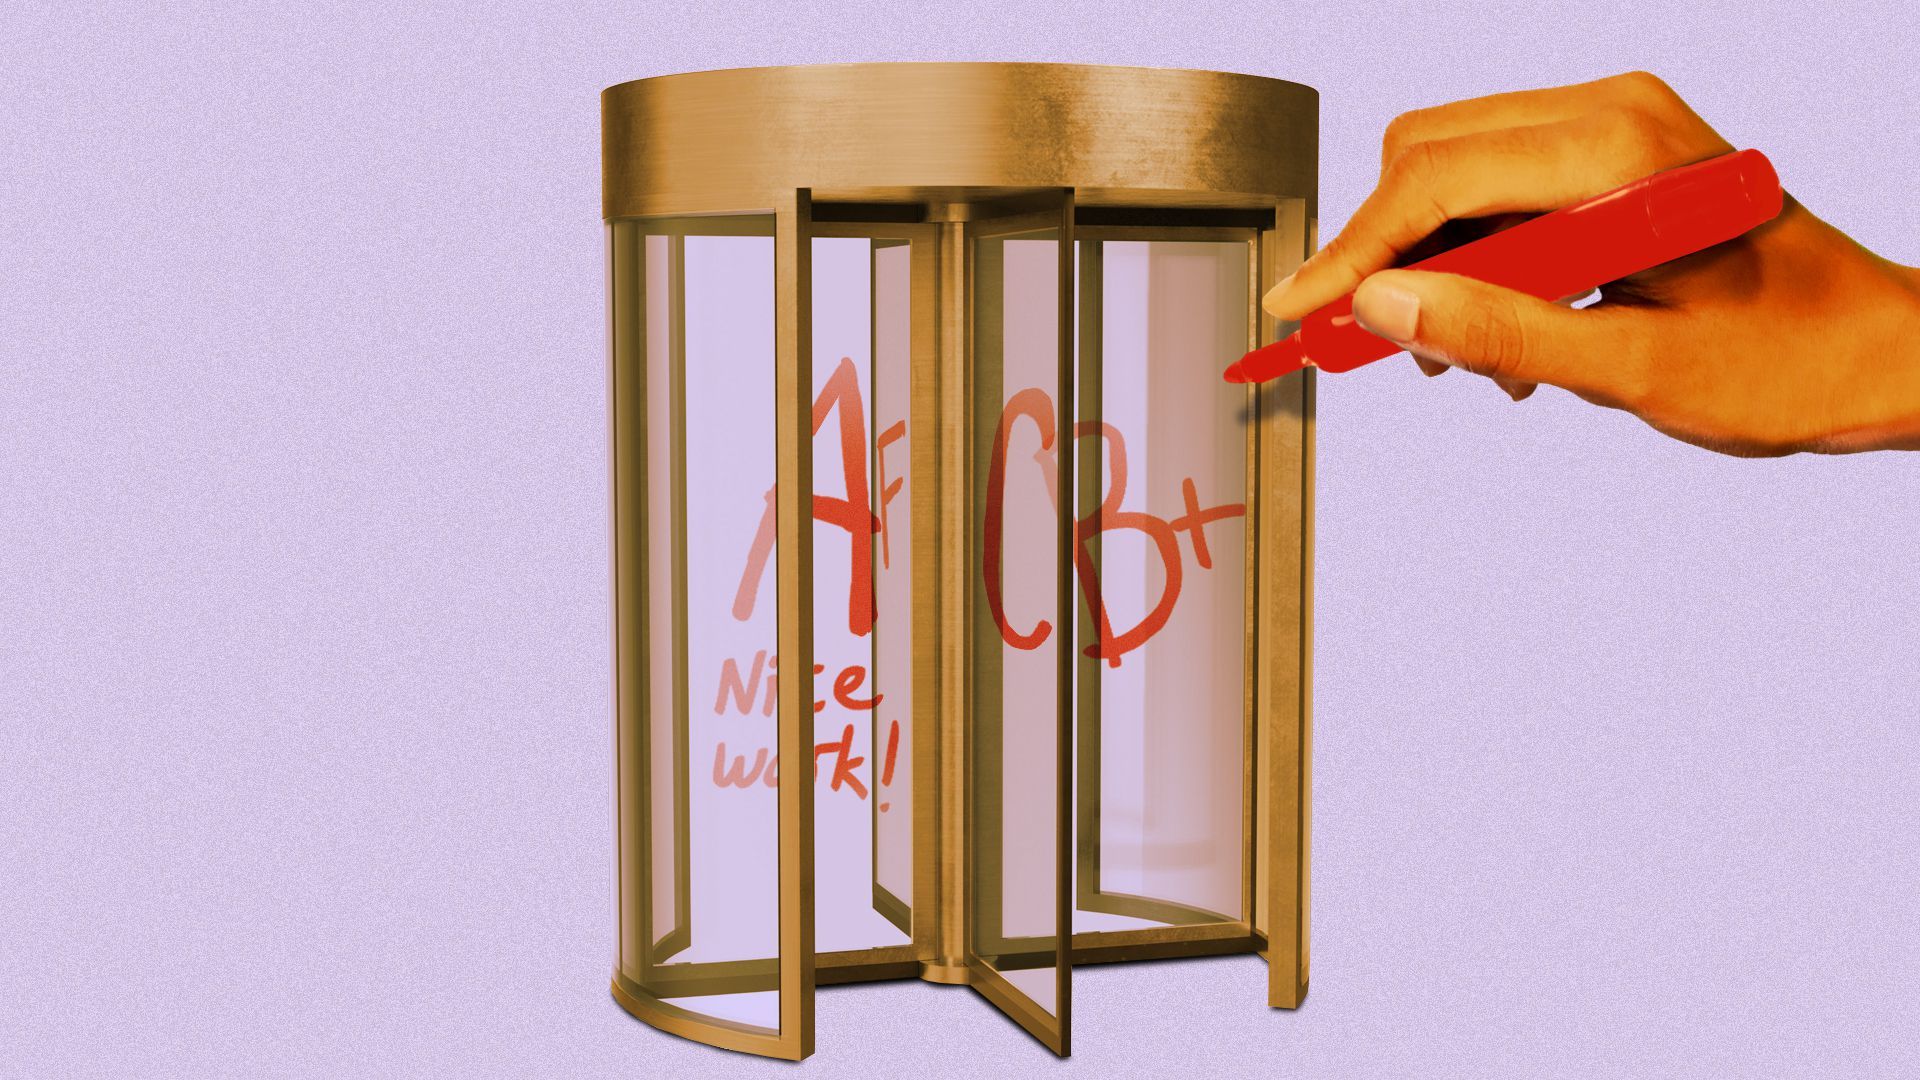 Illustration of a giant hand writing grades on a revolving door